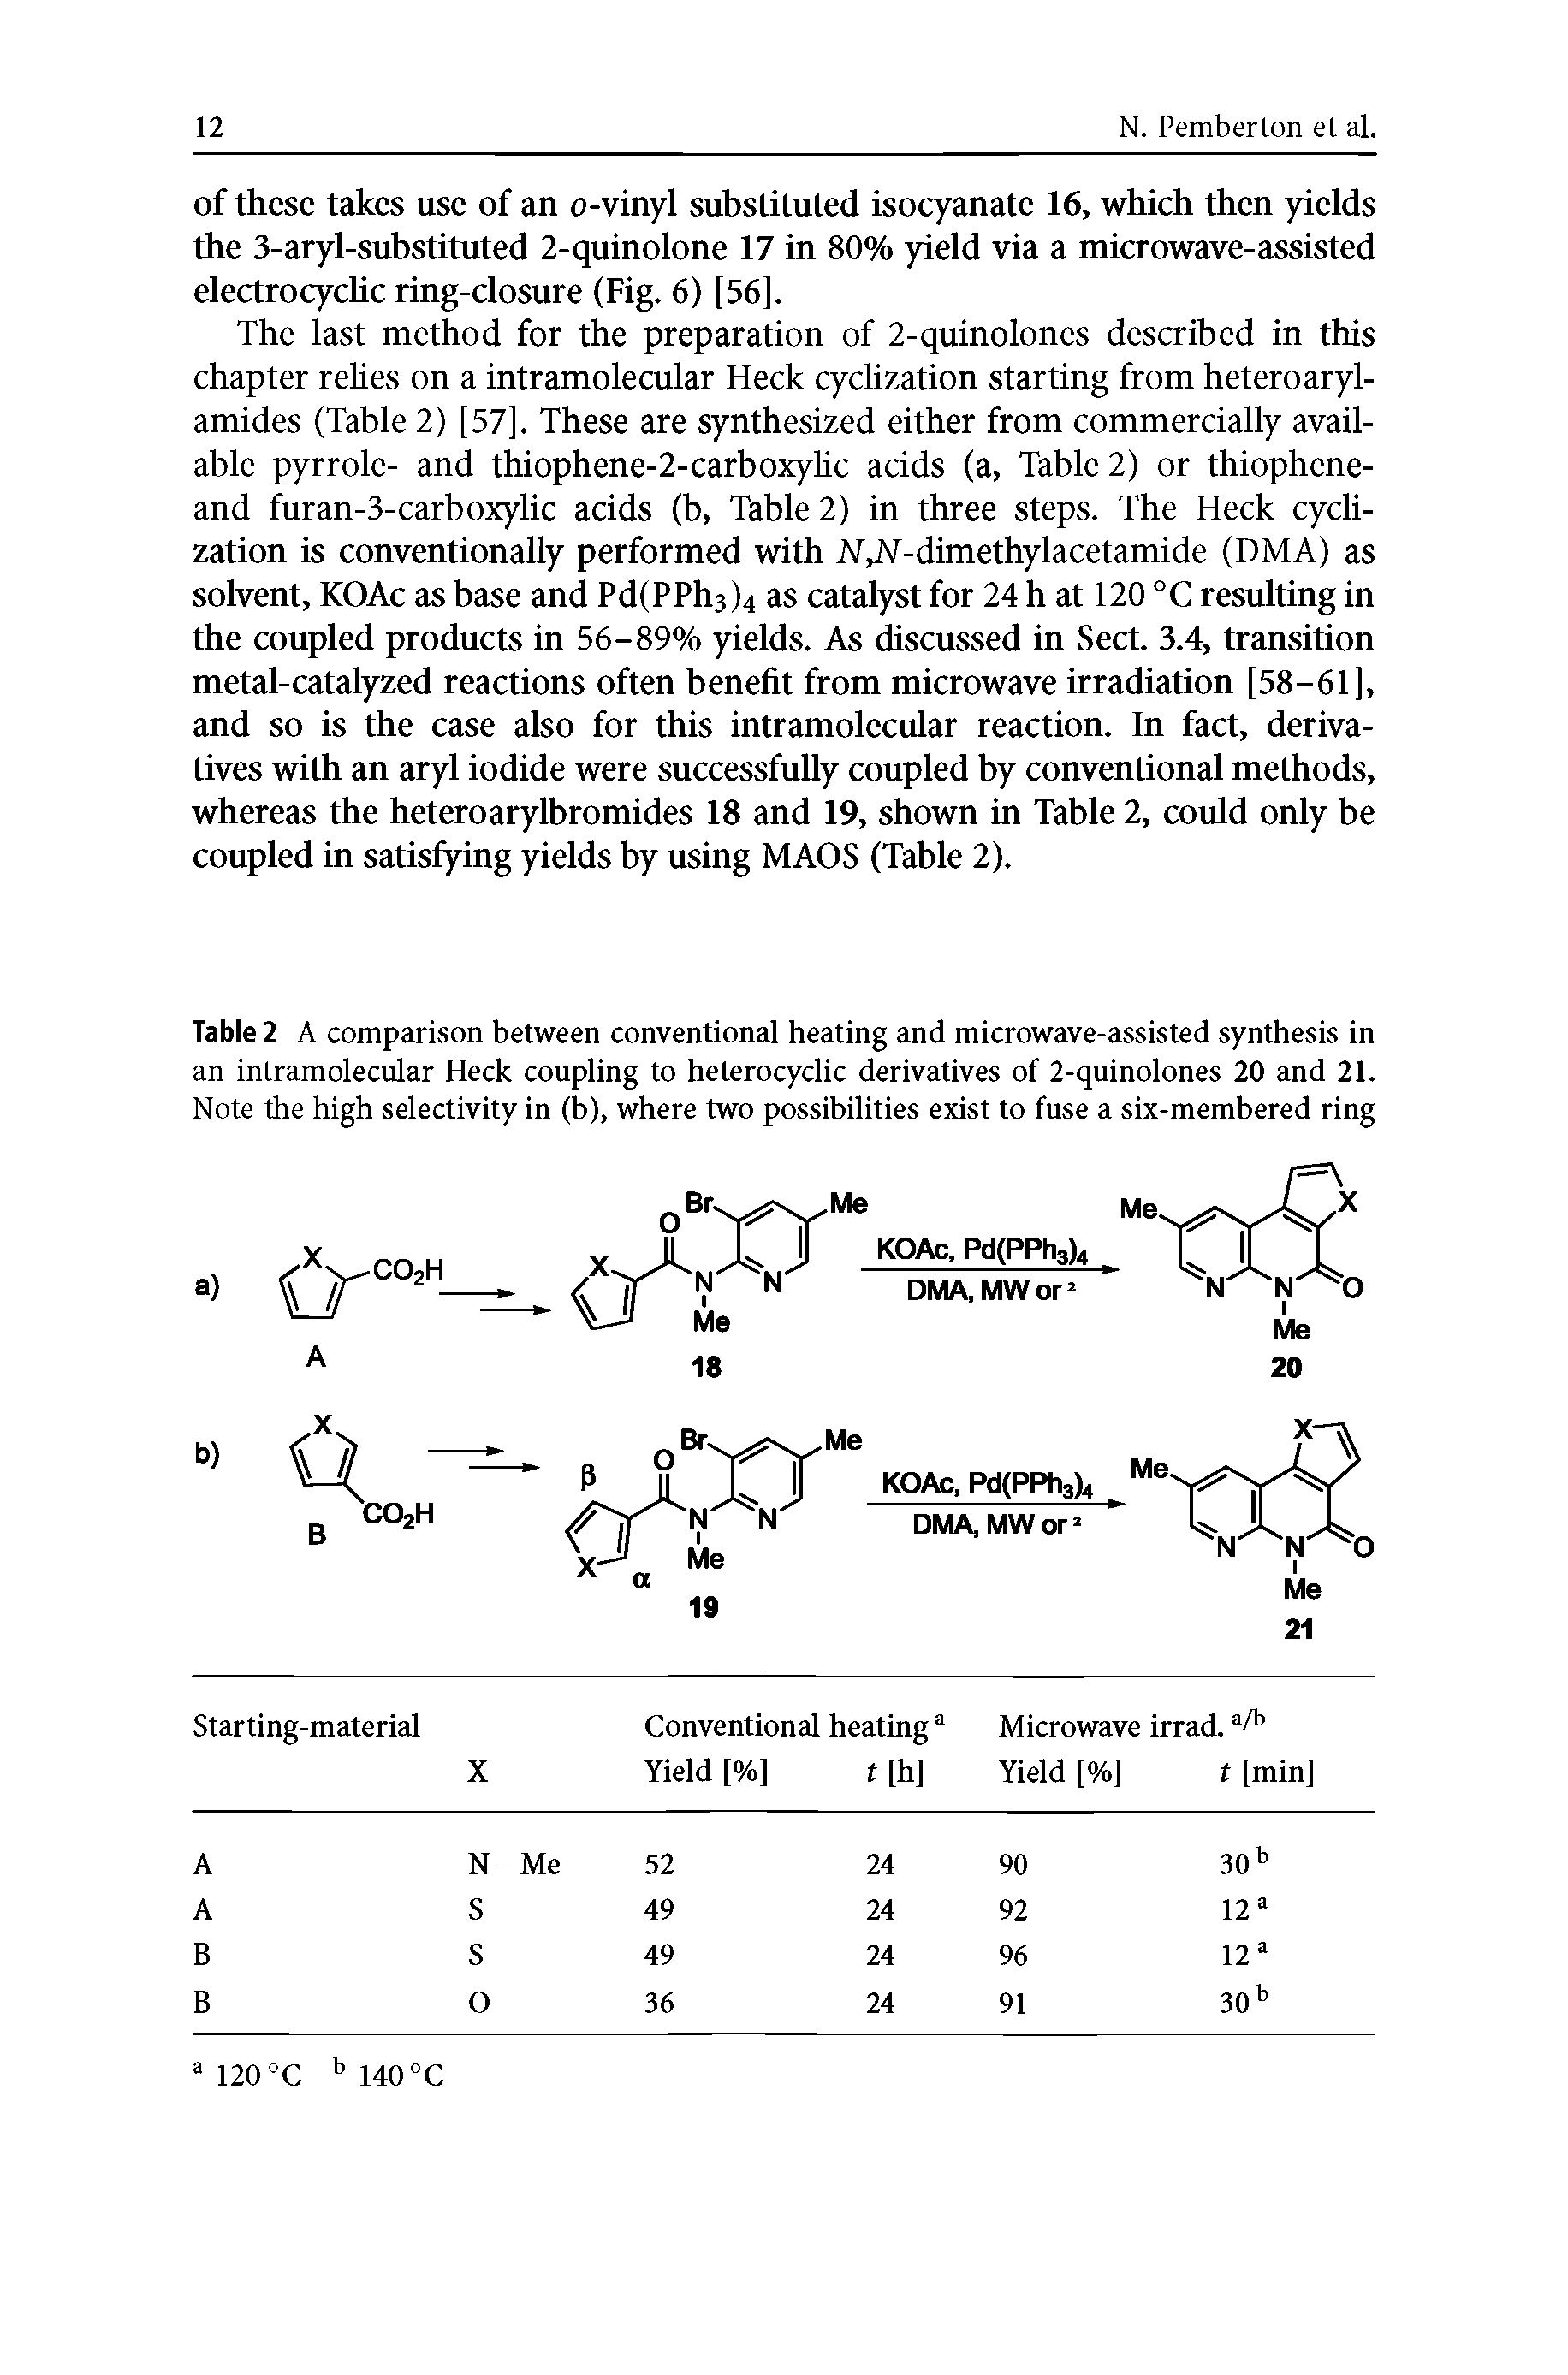 Table 2 A comparison between conventional heating and microwave-assisted synthesis in an intramolecular Heck coupling to heterocyclic derivatives of 2-quinolones 20 and 21. Note the high selectivity in (b), where two possibilities exist to fuse a six-membered ring...